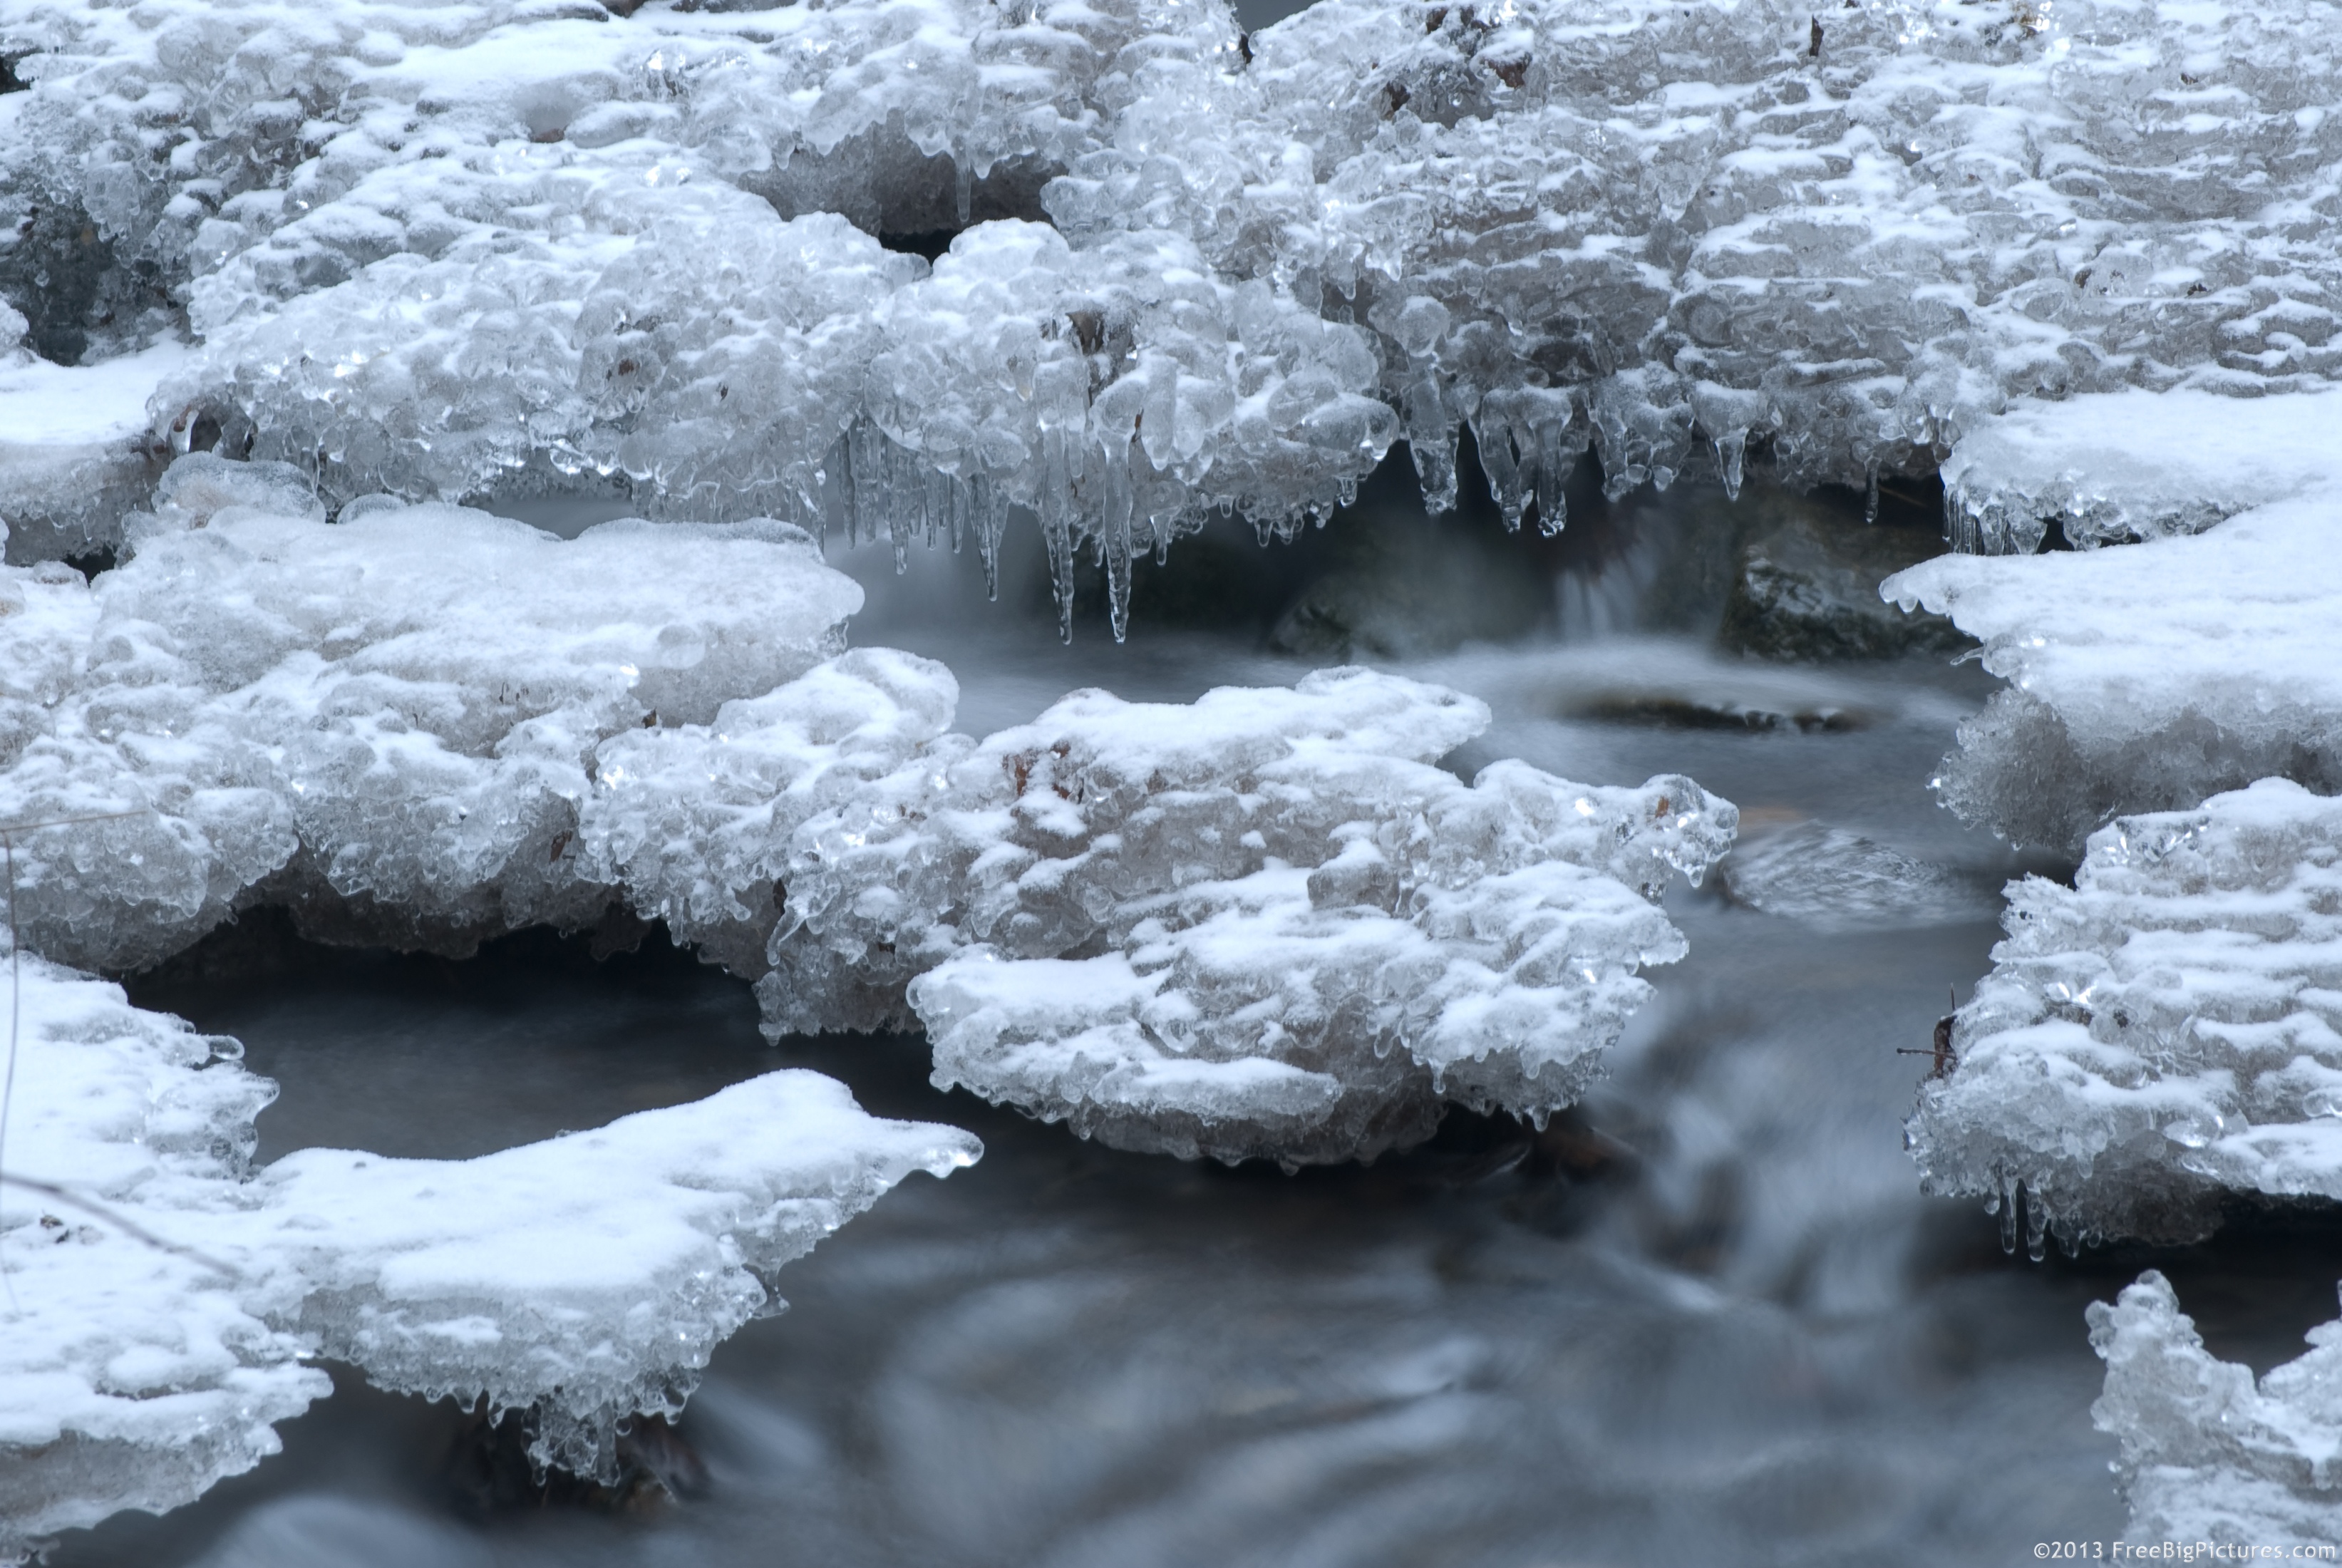 Ice and Water – FREEBigPictures.com